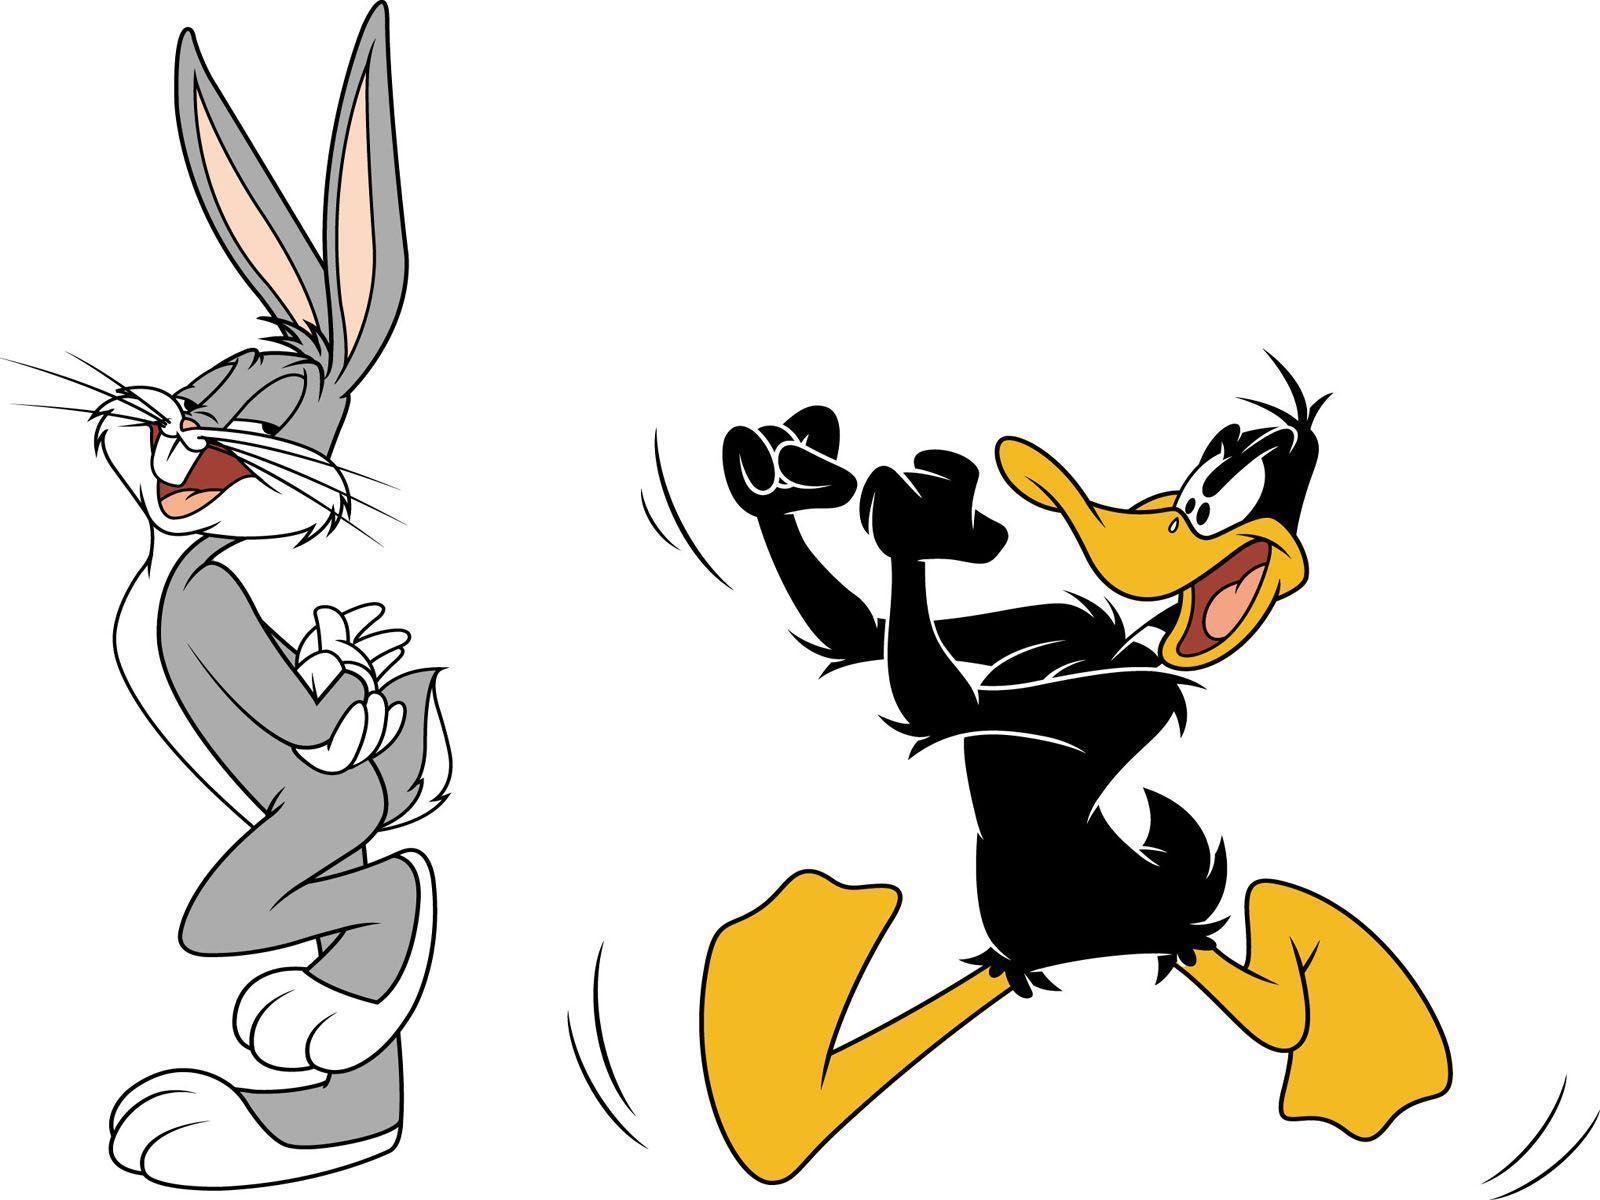 Image For > Image Of Looney Tunes Cartoon Characters